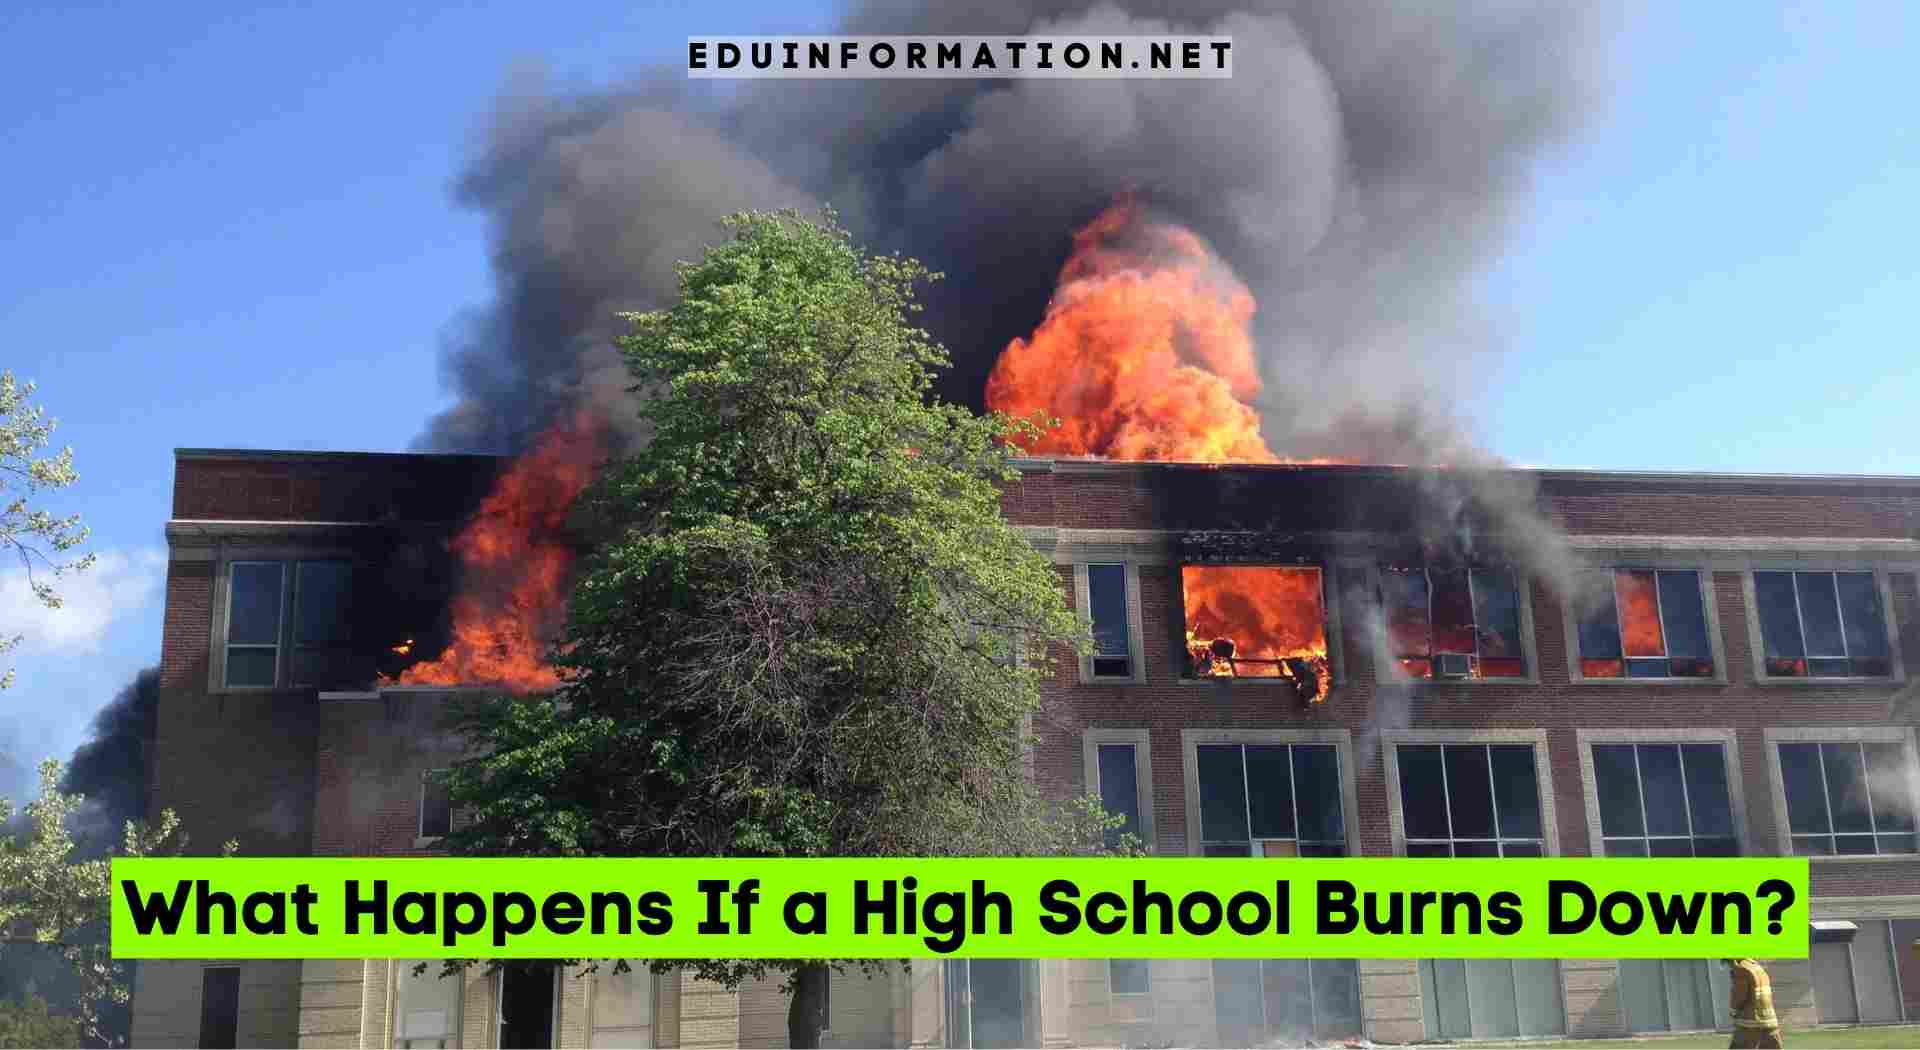 What Happens If a High School Burns Down?